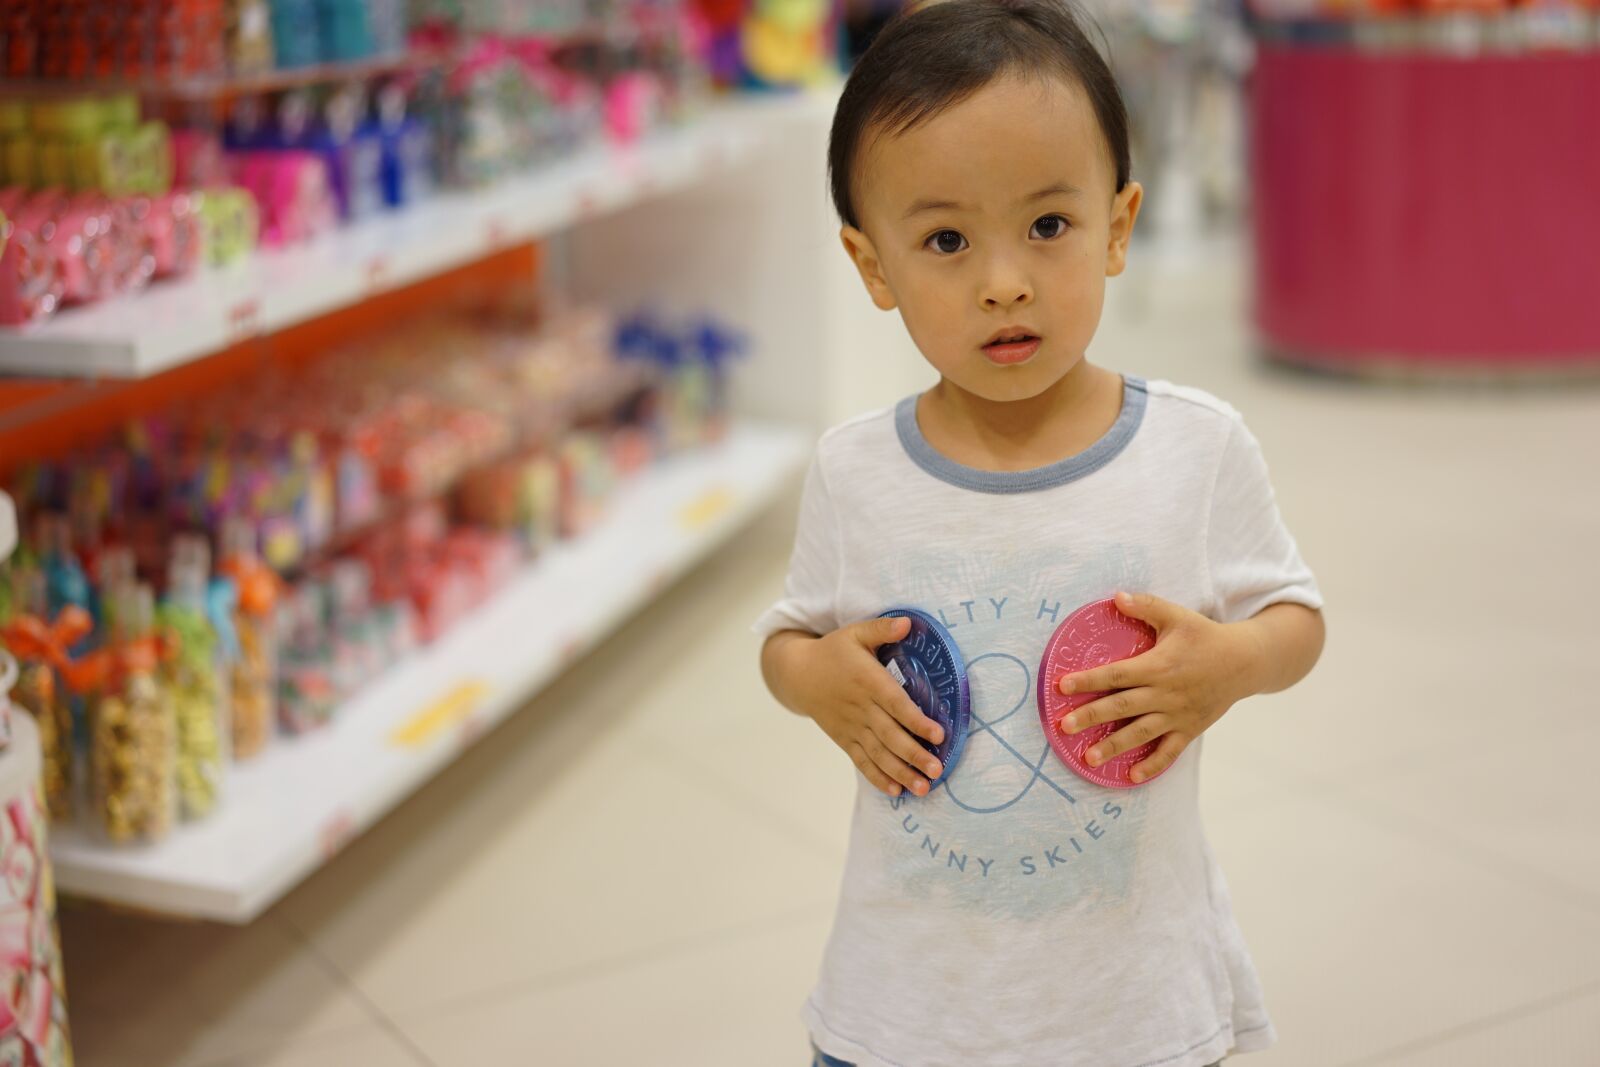 Sony a7 II sample photo. Child, compact, cute photography